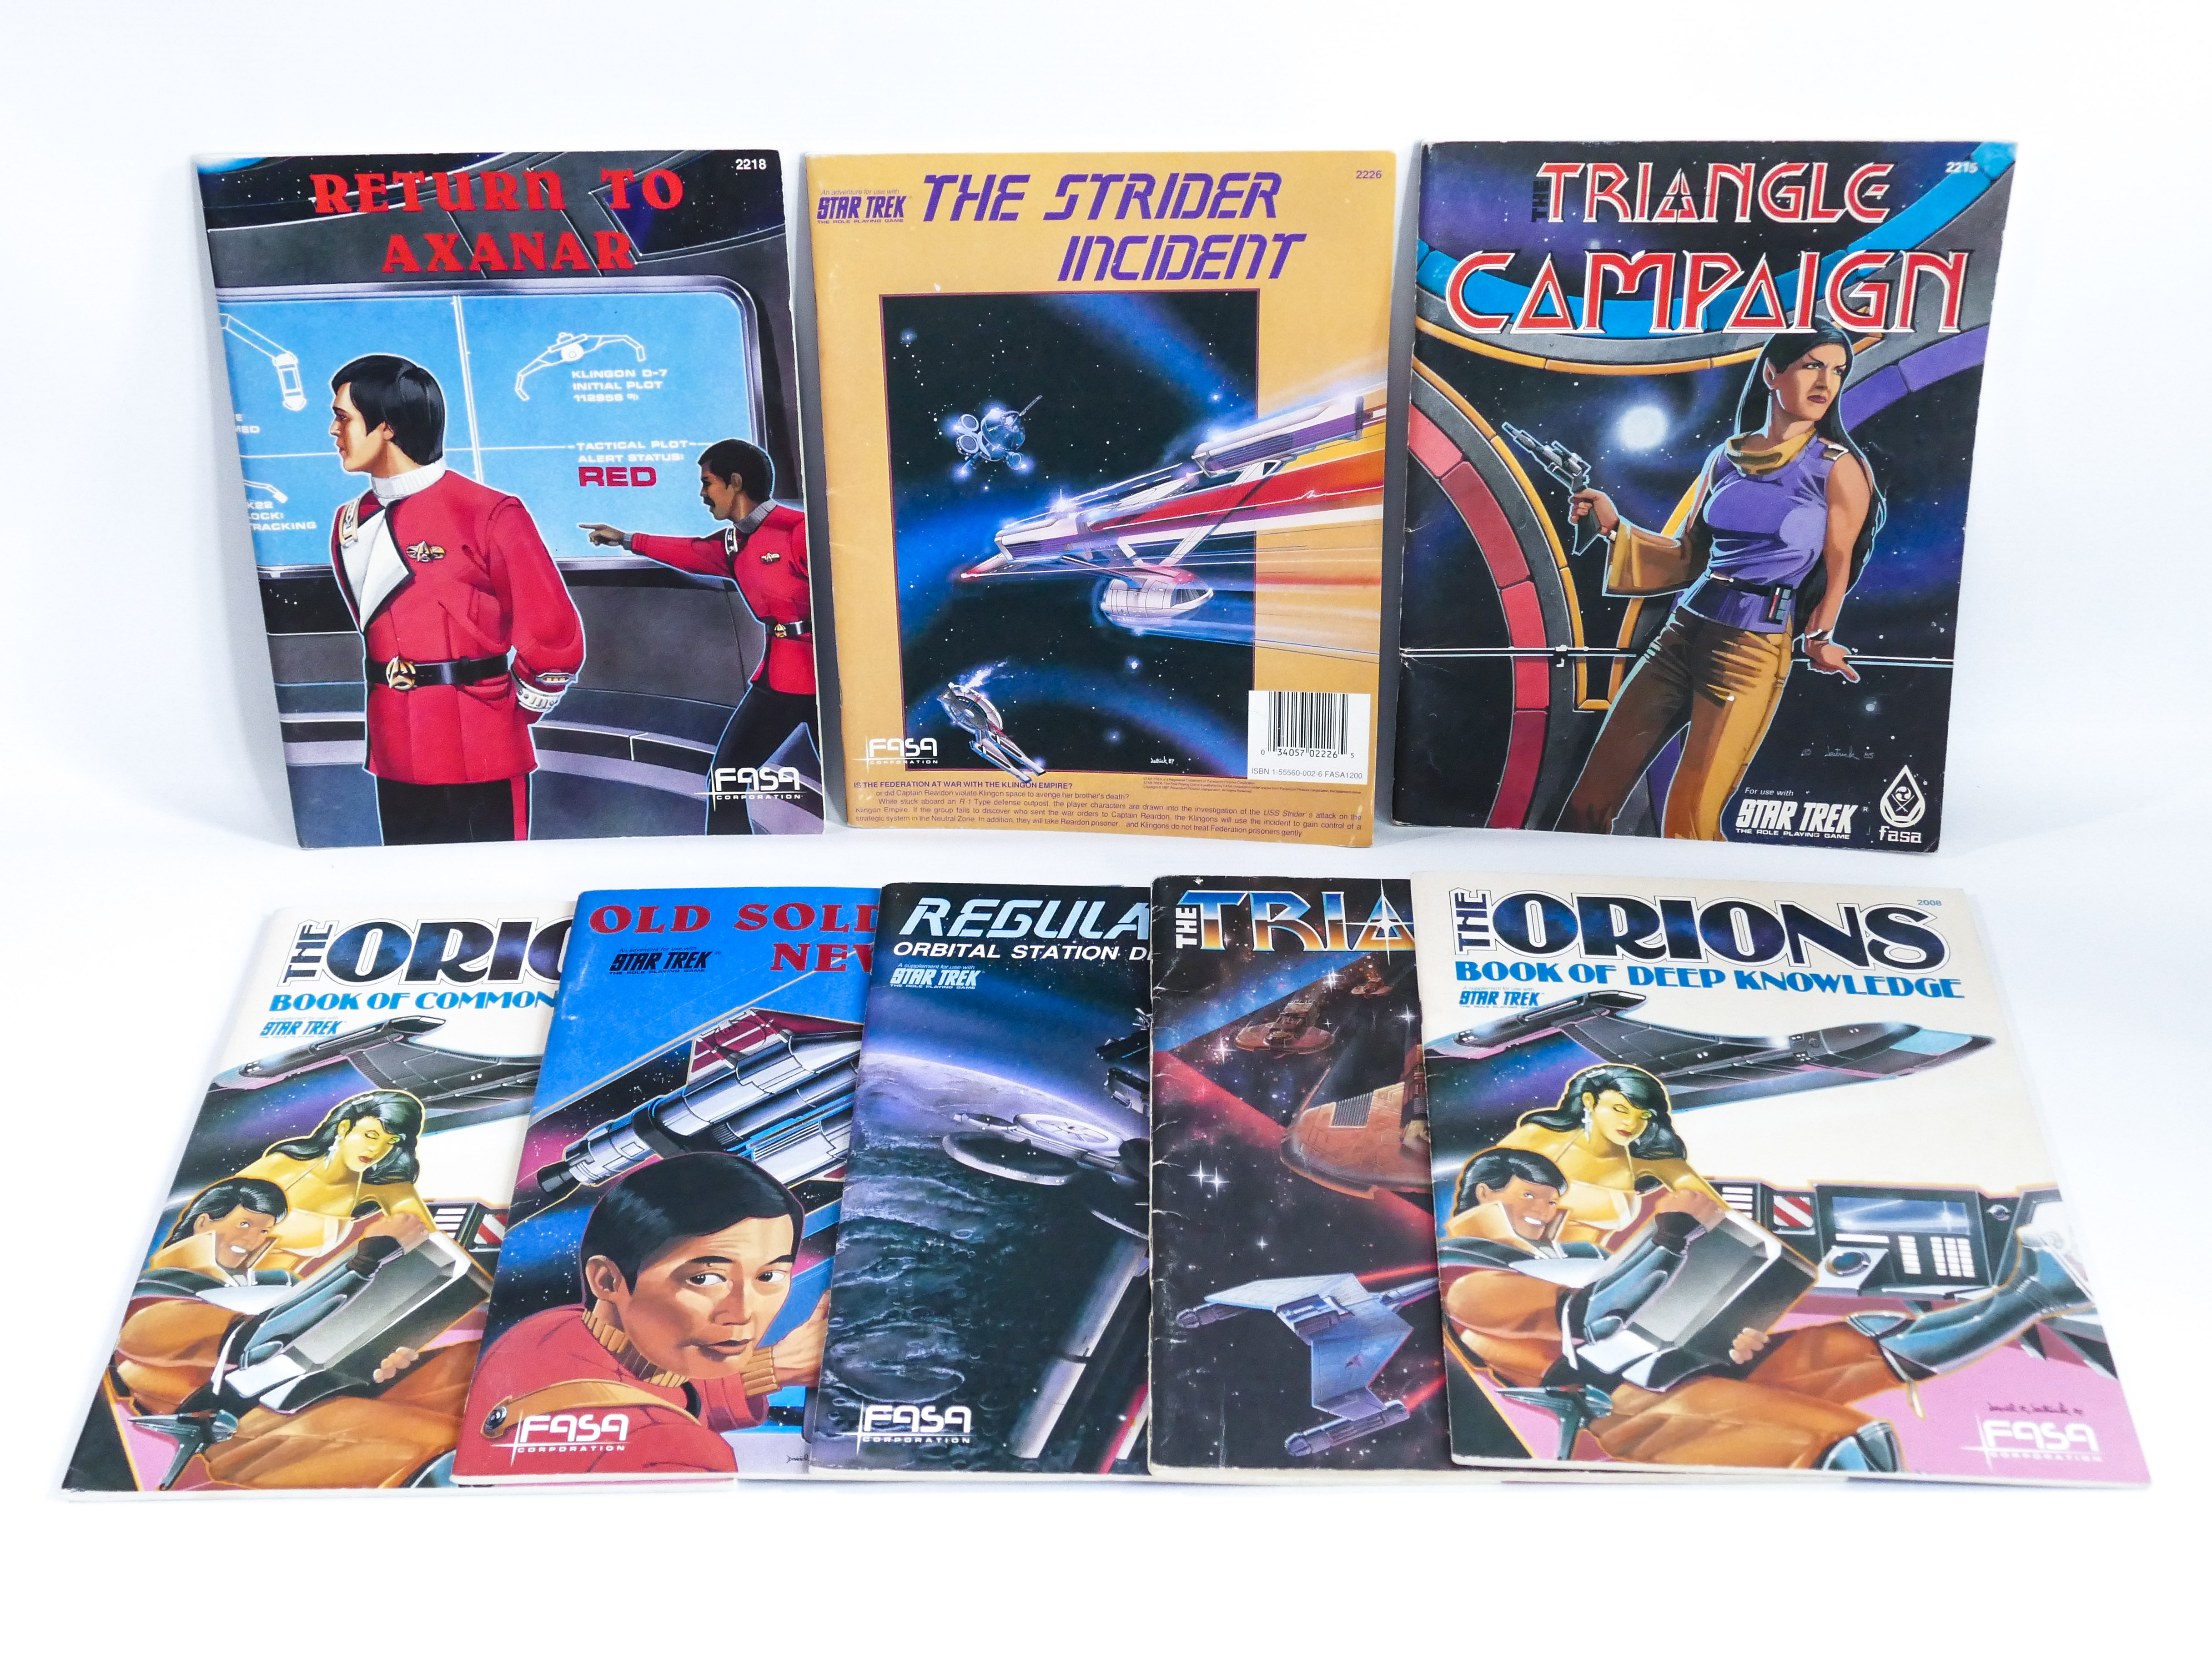 STAR TREK THE ROLE PLAYING GAME FASA VINTAGE SCIENCE FICTION SCI-FI SPACESHIP RPG BOOK LOT C